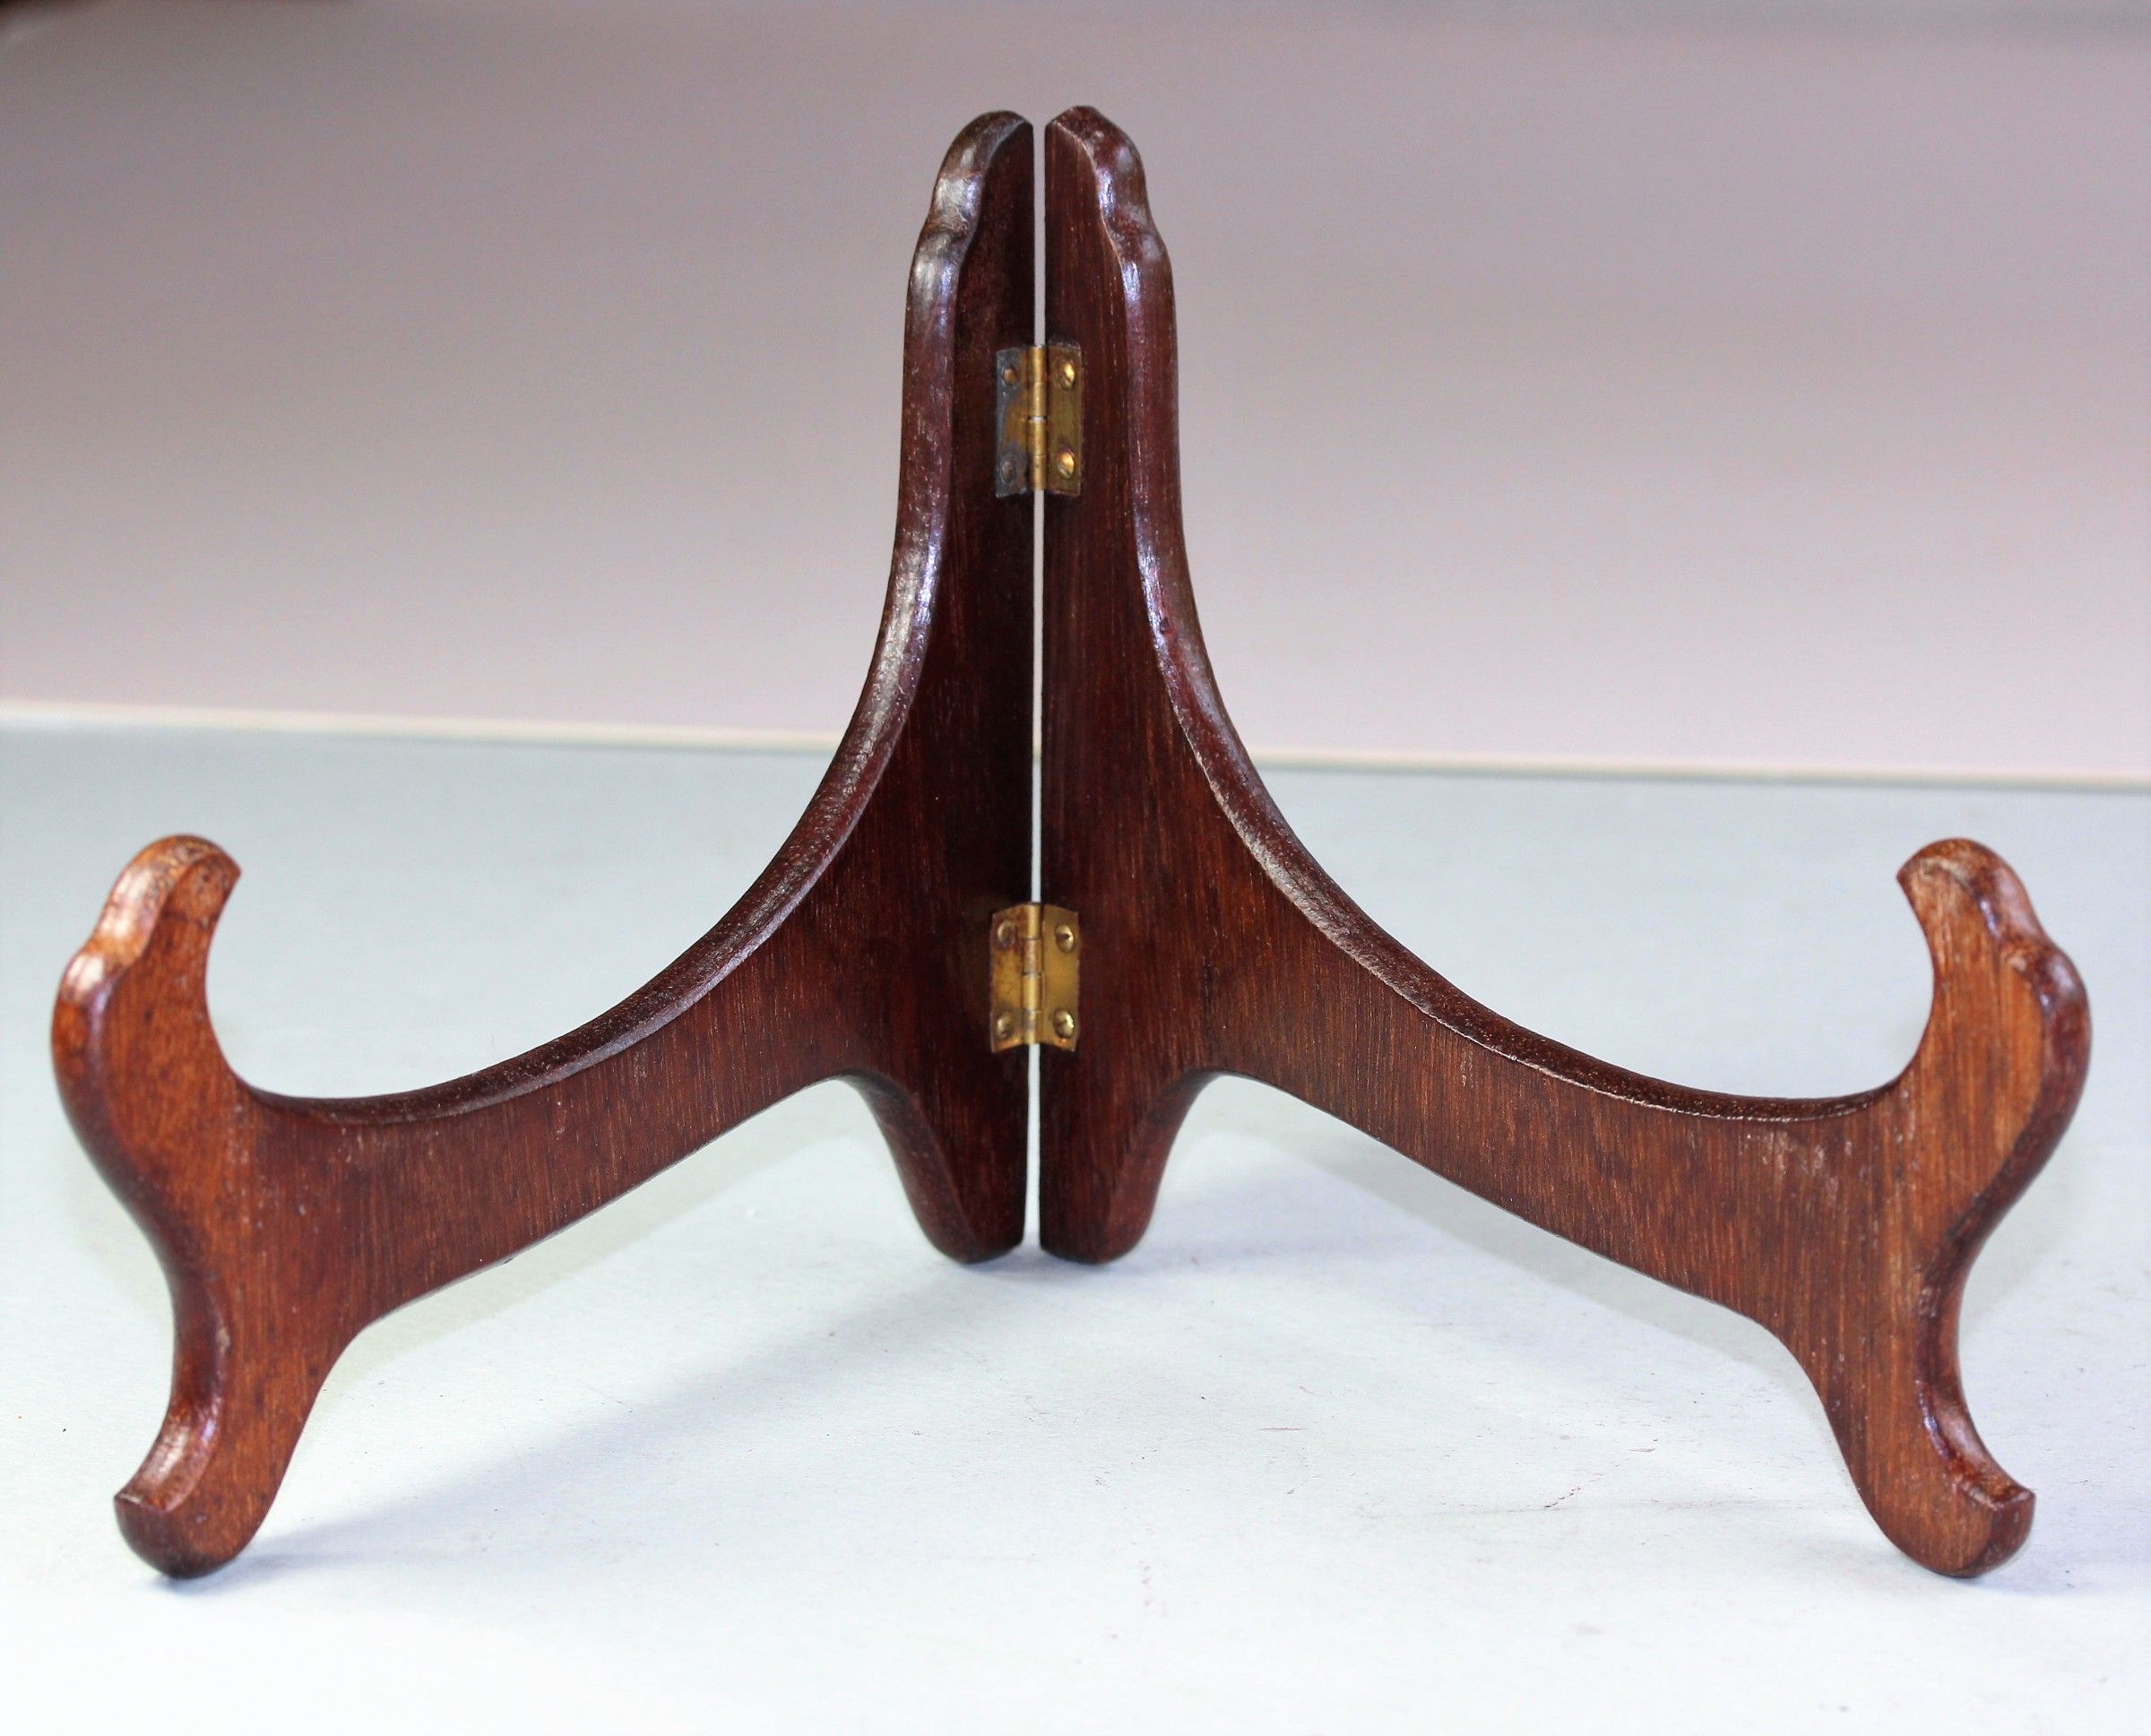 &quot;Hong Kong&quot; label Hardwood Plate or Bowl Display Stand